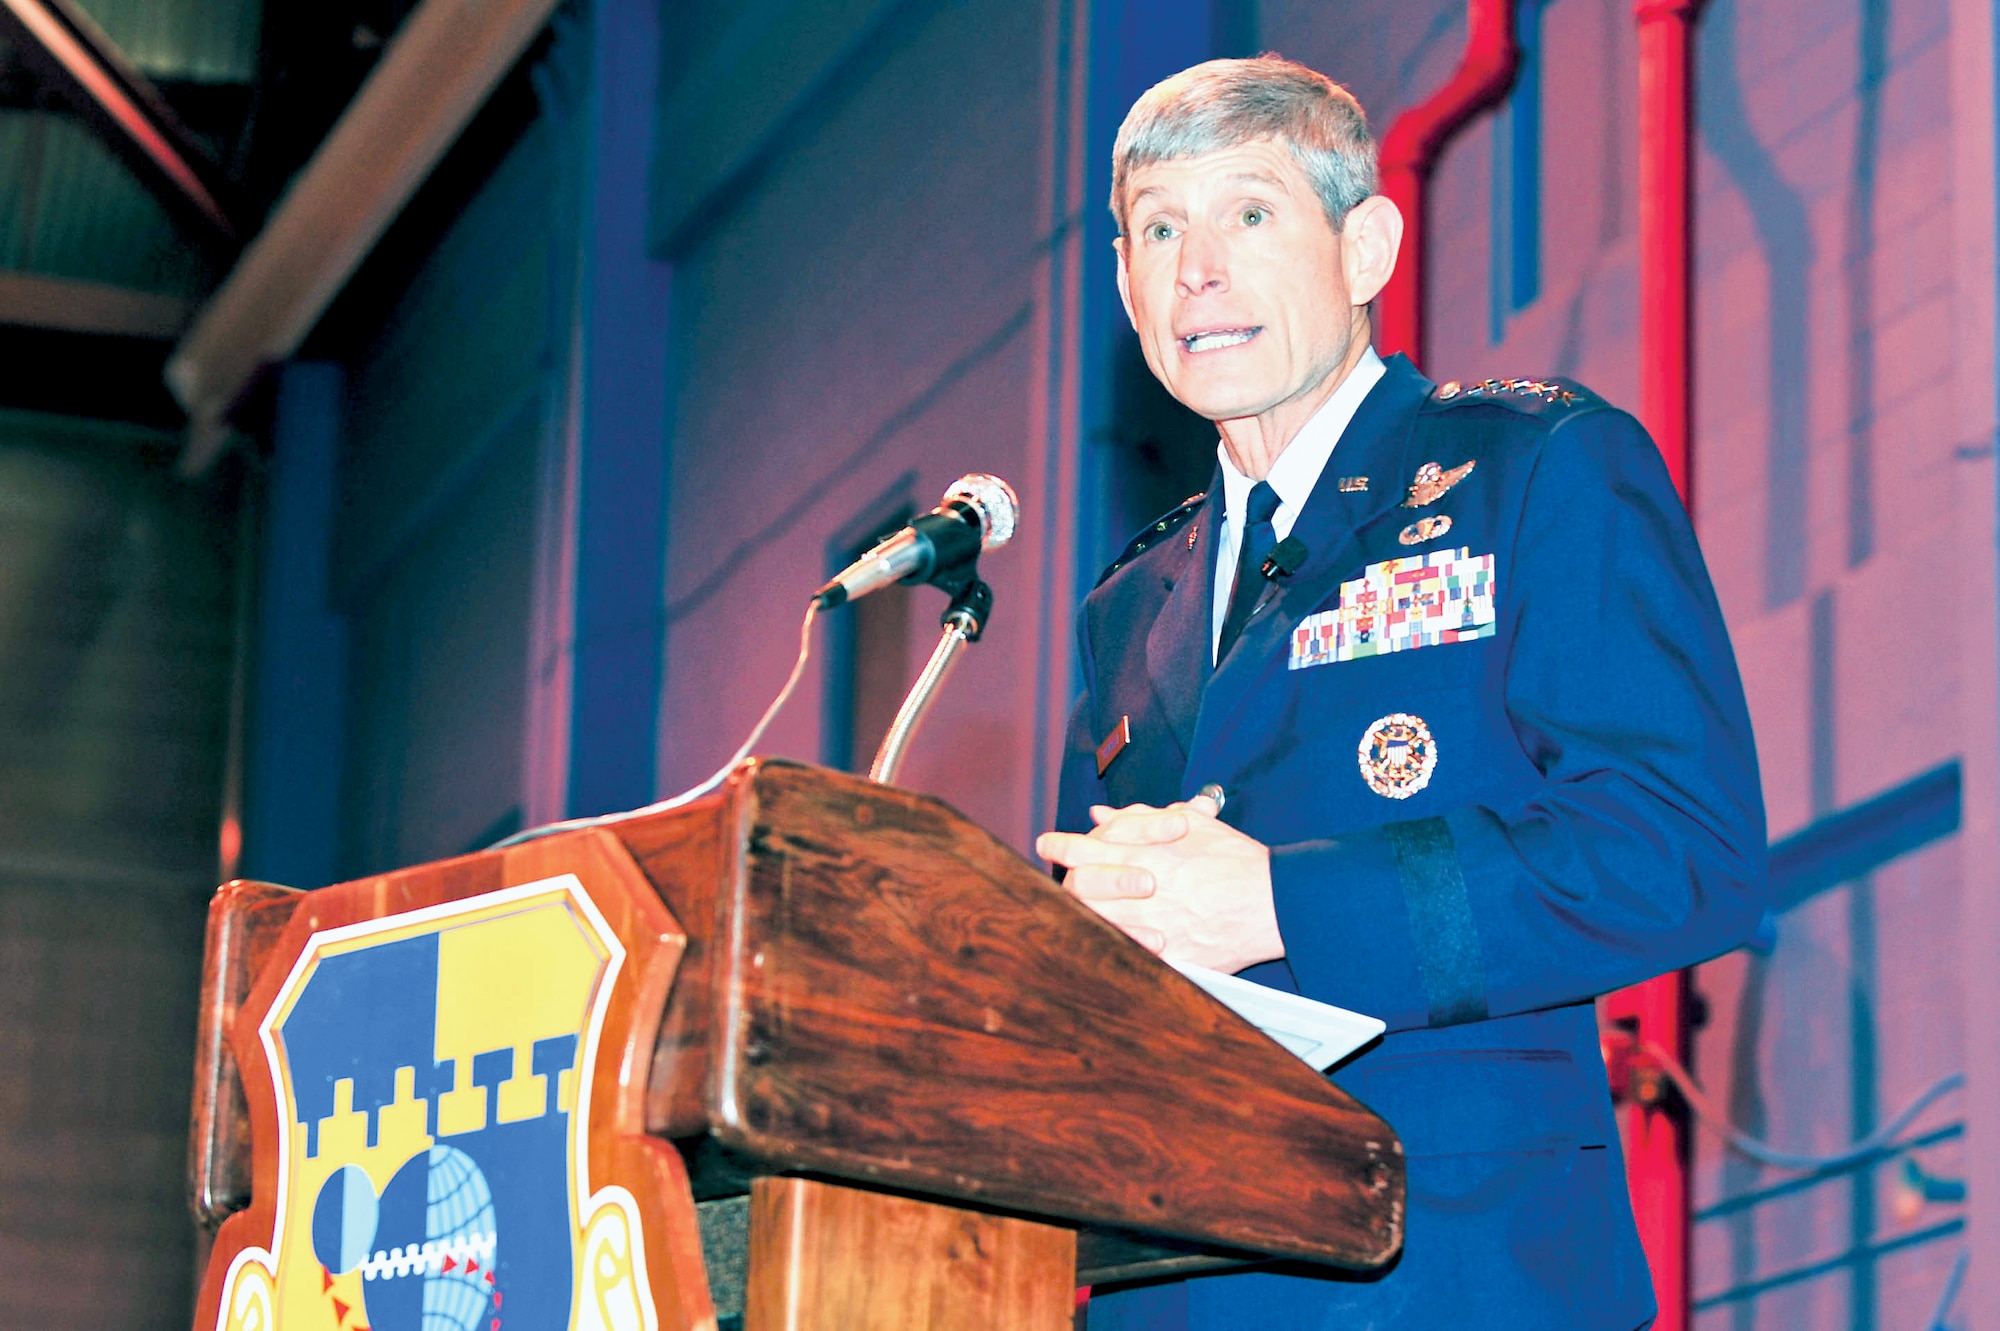 Air Force Chief of Staff Gen. Norton Schwartz provides remarks Oct. 23, 2009, at Cape Canaveral Air Force Station, Fla., during a ceremony honoring 13 Airmen killed in a plane crash May 17, 1962. while supporting NASA's Mercury mission.  (U.S. Air Force photo/Jennifer Macklin)